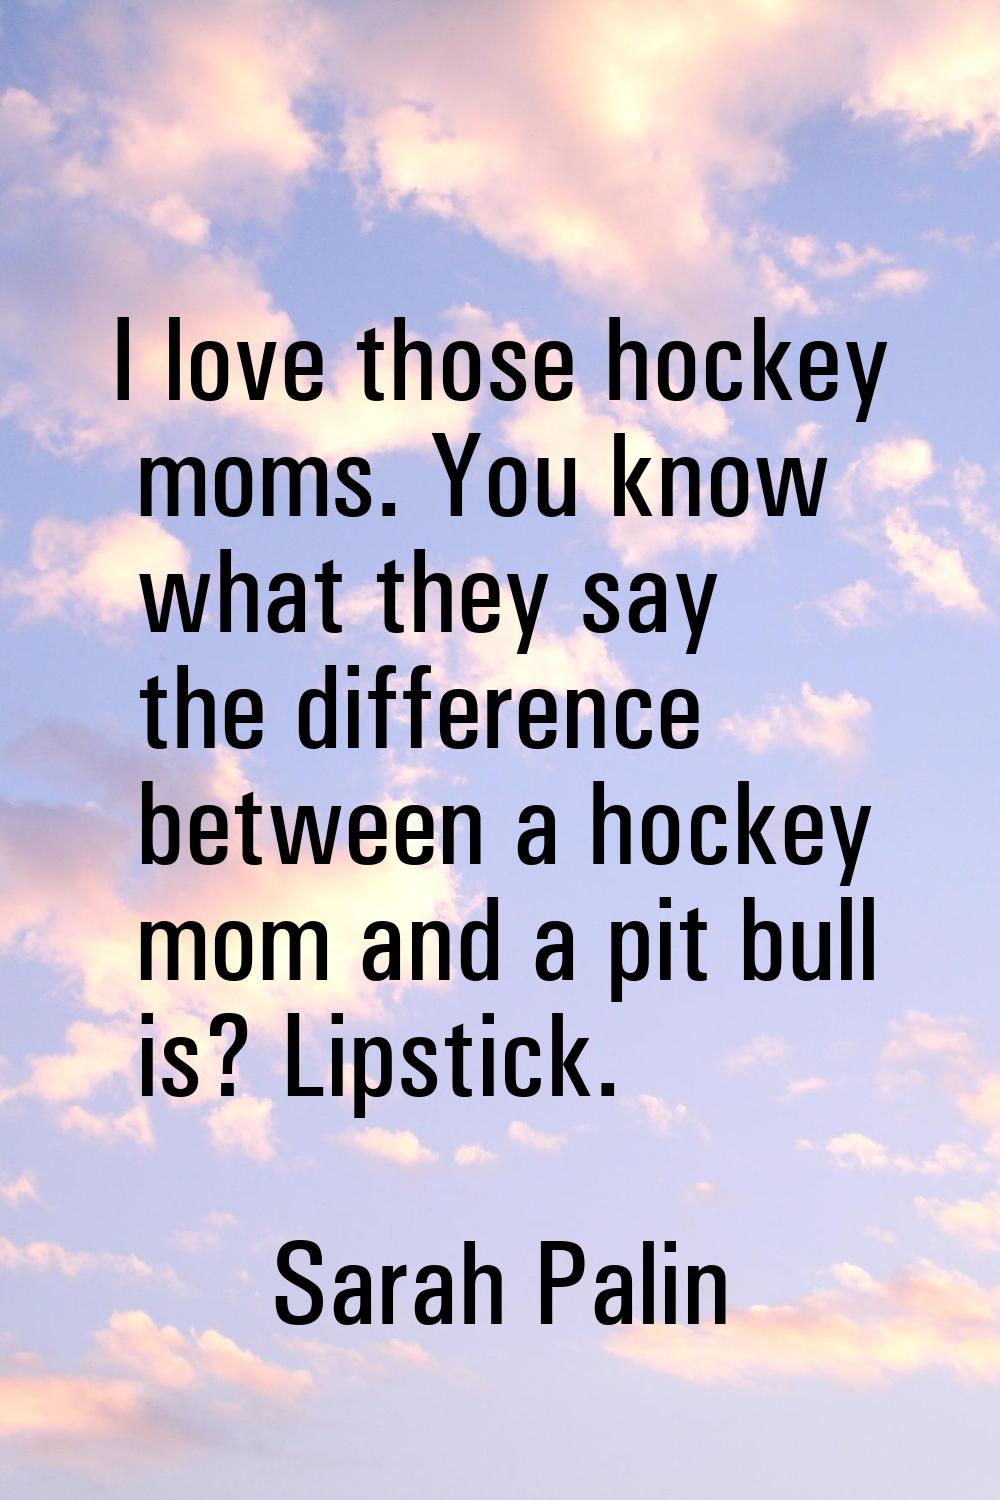 I love those hockey moms. You know what they say the difference between a hockey mom and a pit bull